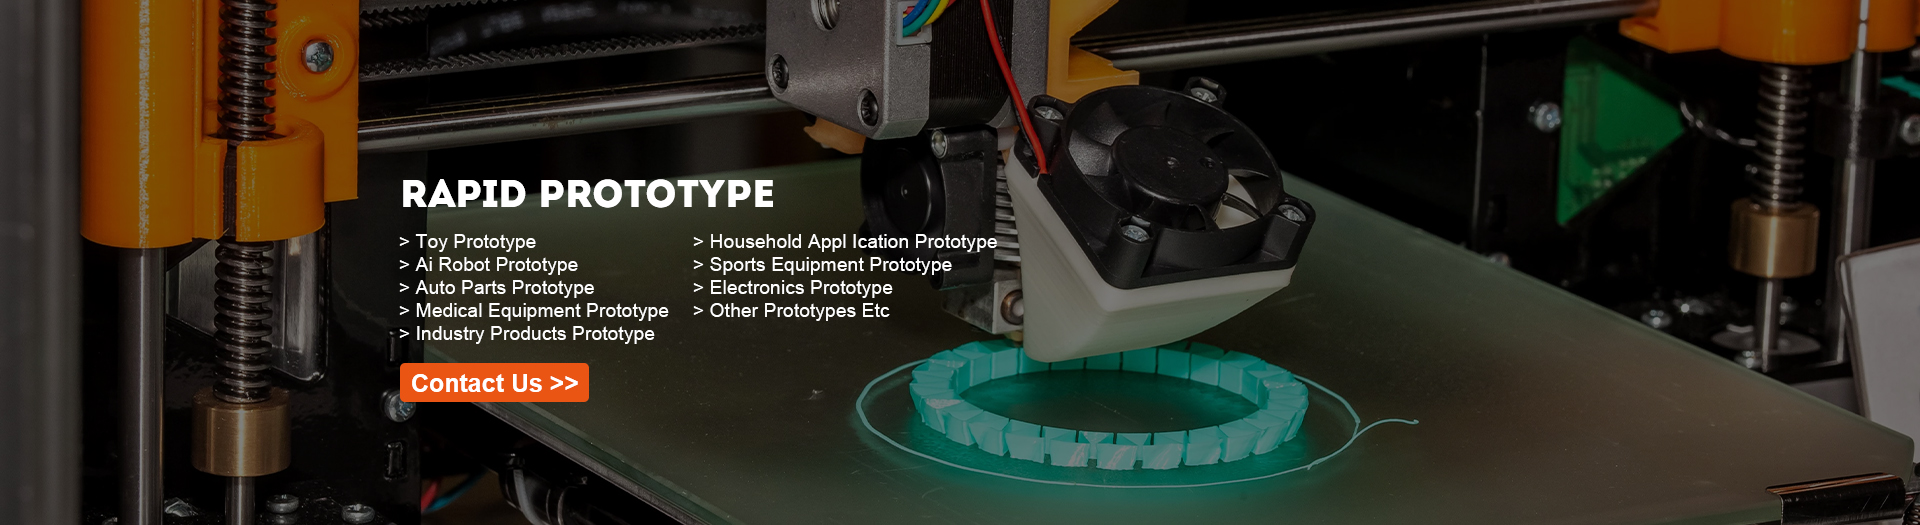 Rapid Prototyping Services